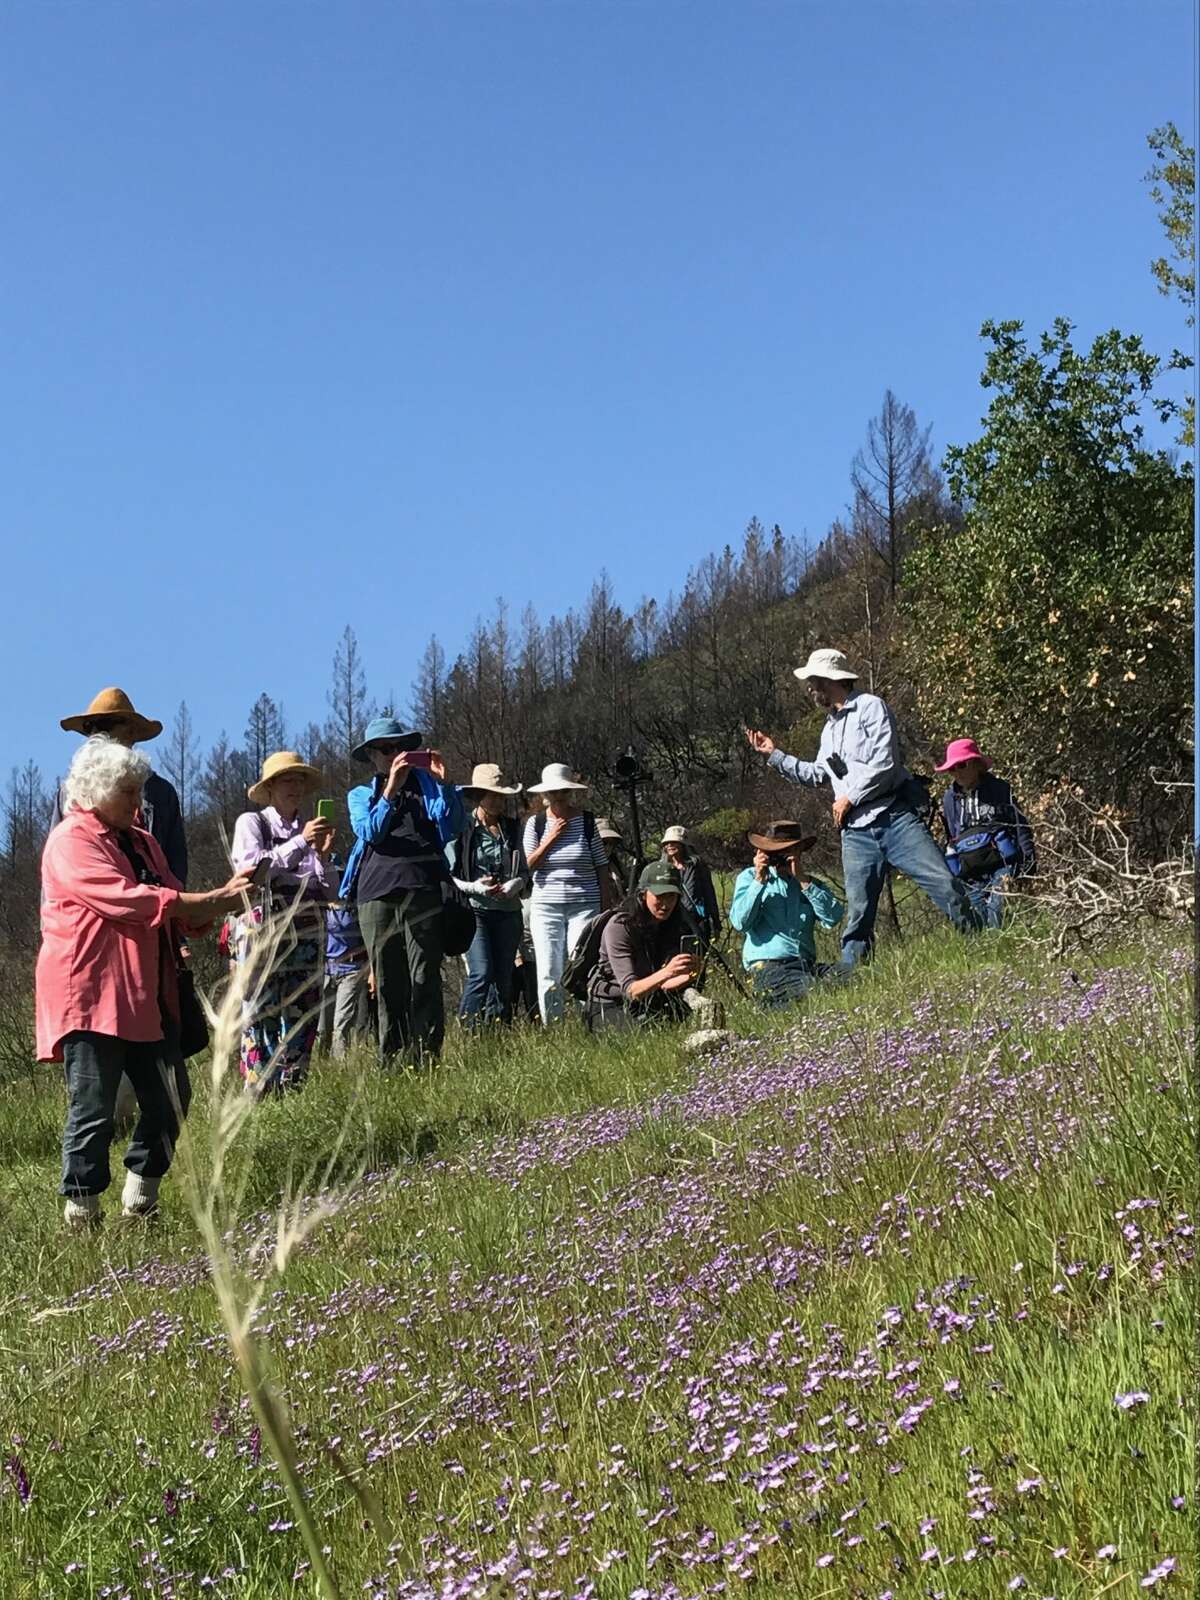 The Sonoma Ecology Center leads a group from Bay Nature Magazine on a wildlife hike in Sugarloaf State Park on April 8, 2018.